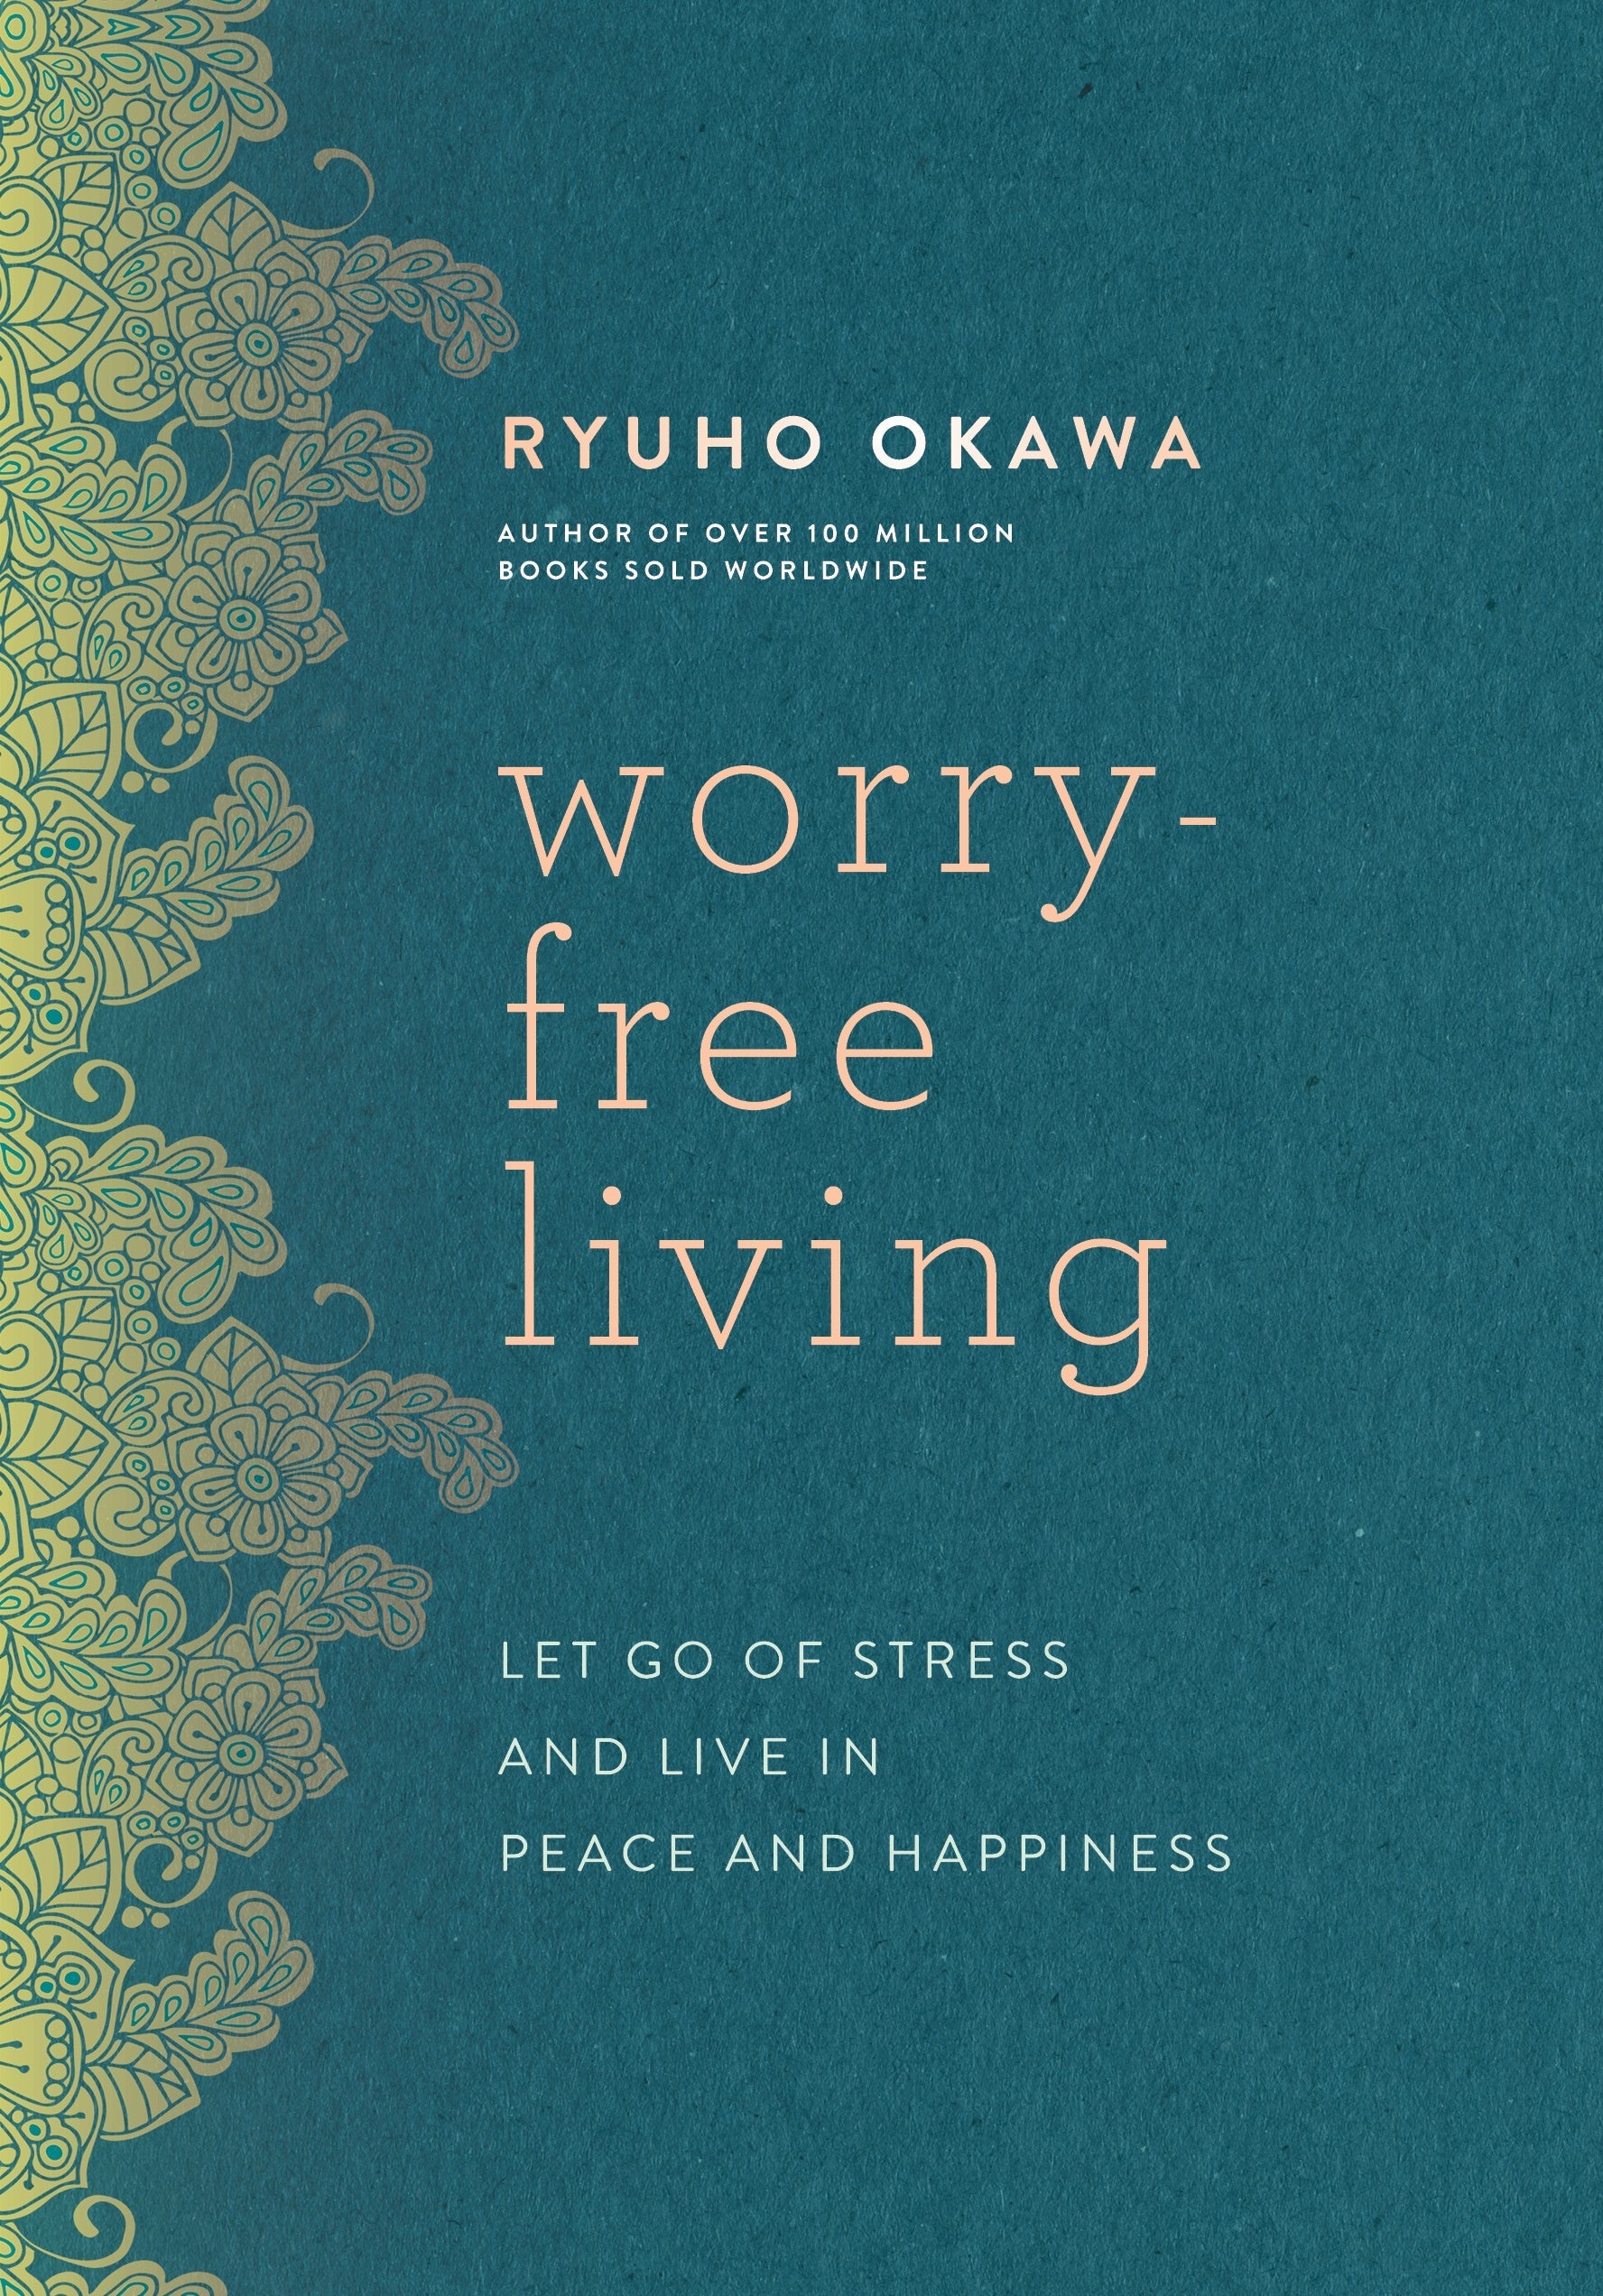 Worry-free Living : Let Go of Stress and Live in Peace and Happiness, Ryuho Okawa, English - IRH Press International